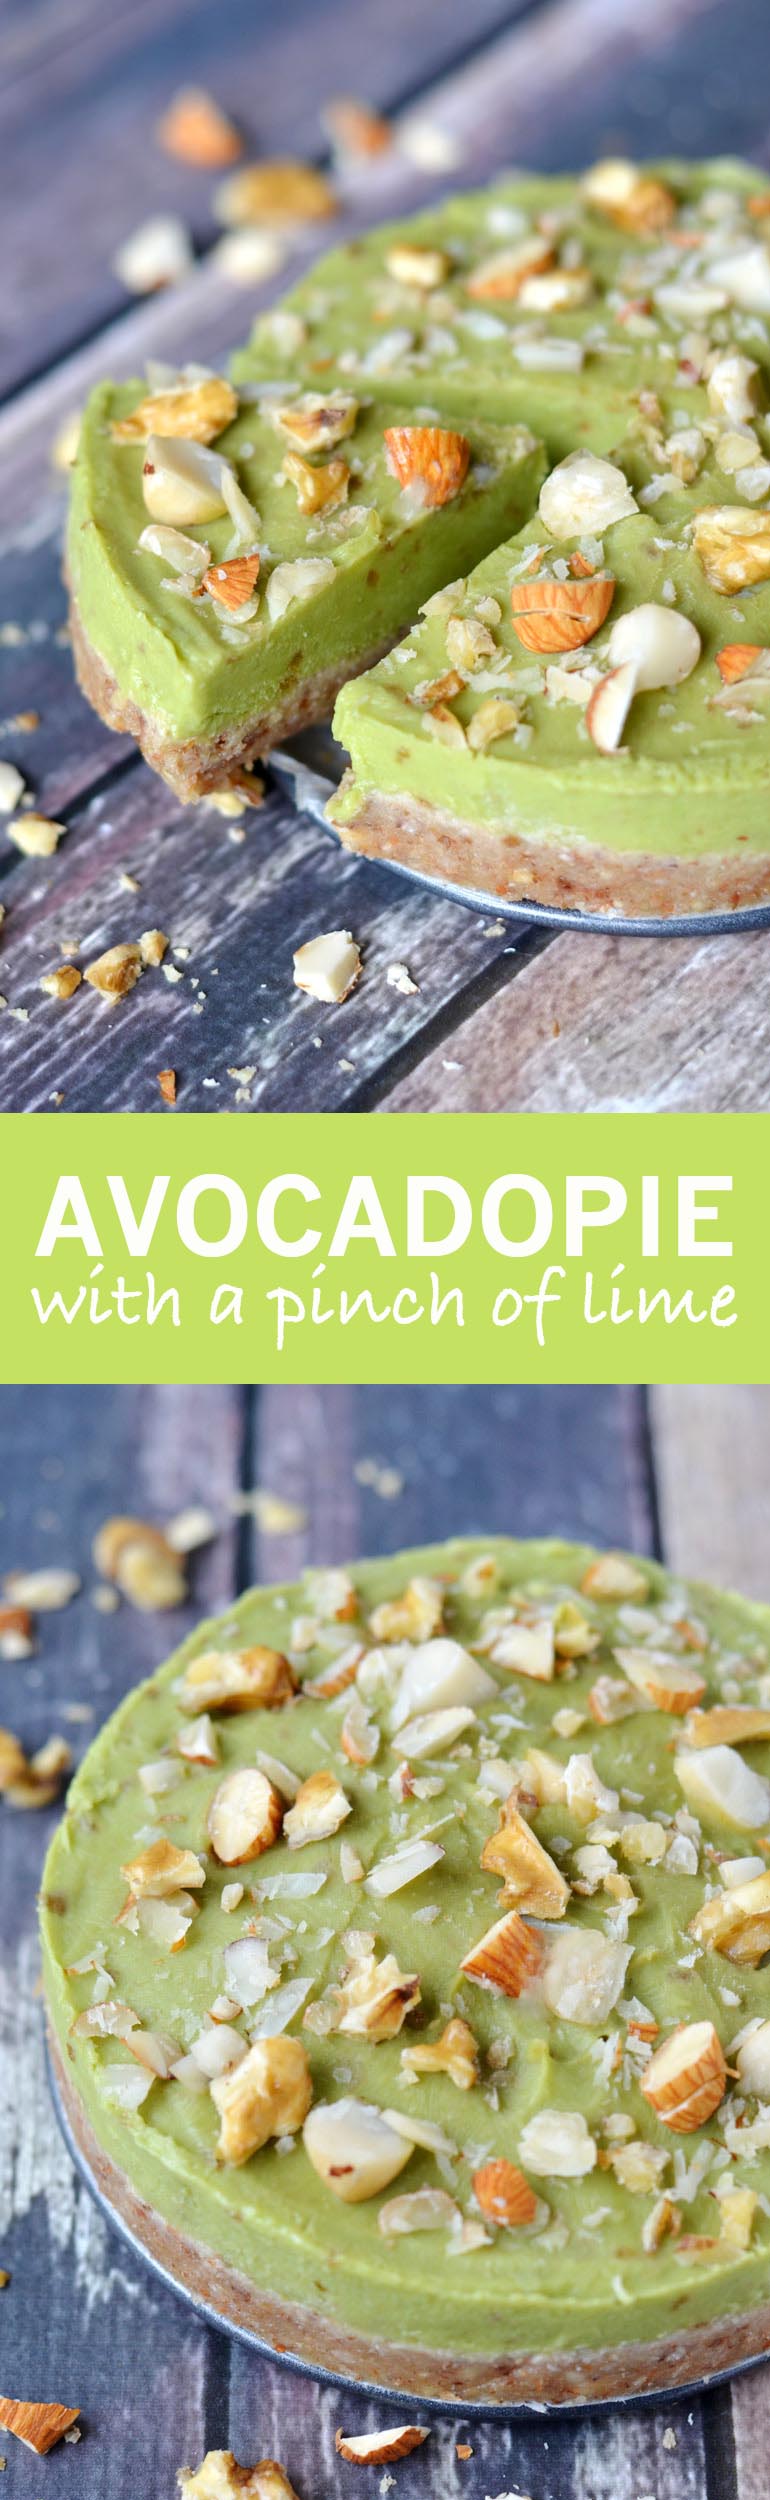 Limoen Avocado Taart - Lime Avoado Pie. Yum, who wouldn't want this gorgeous pice of avocado pie?!